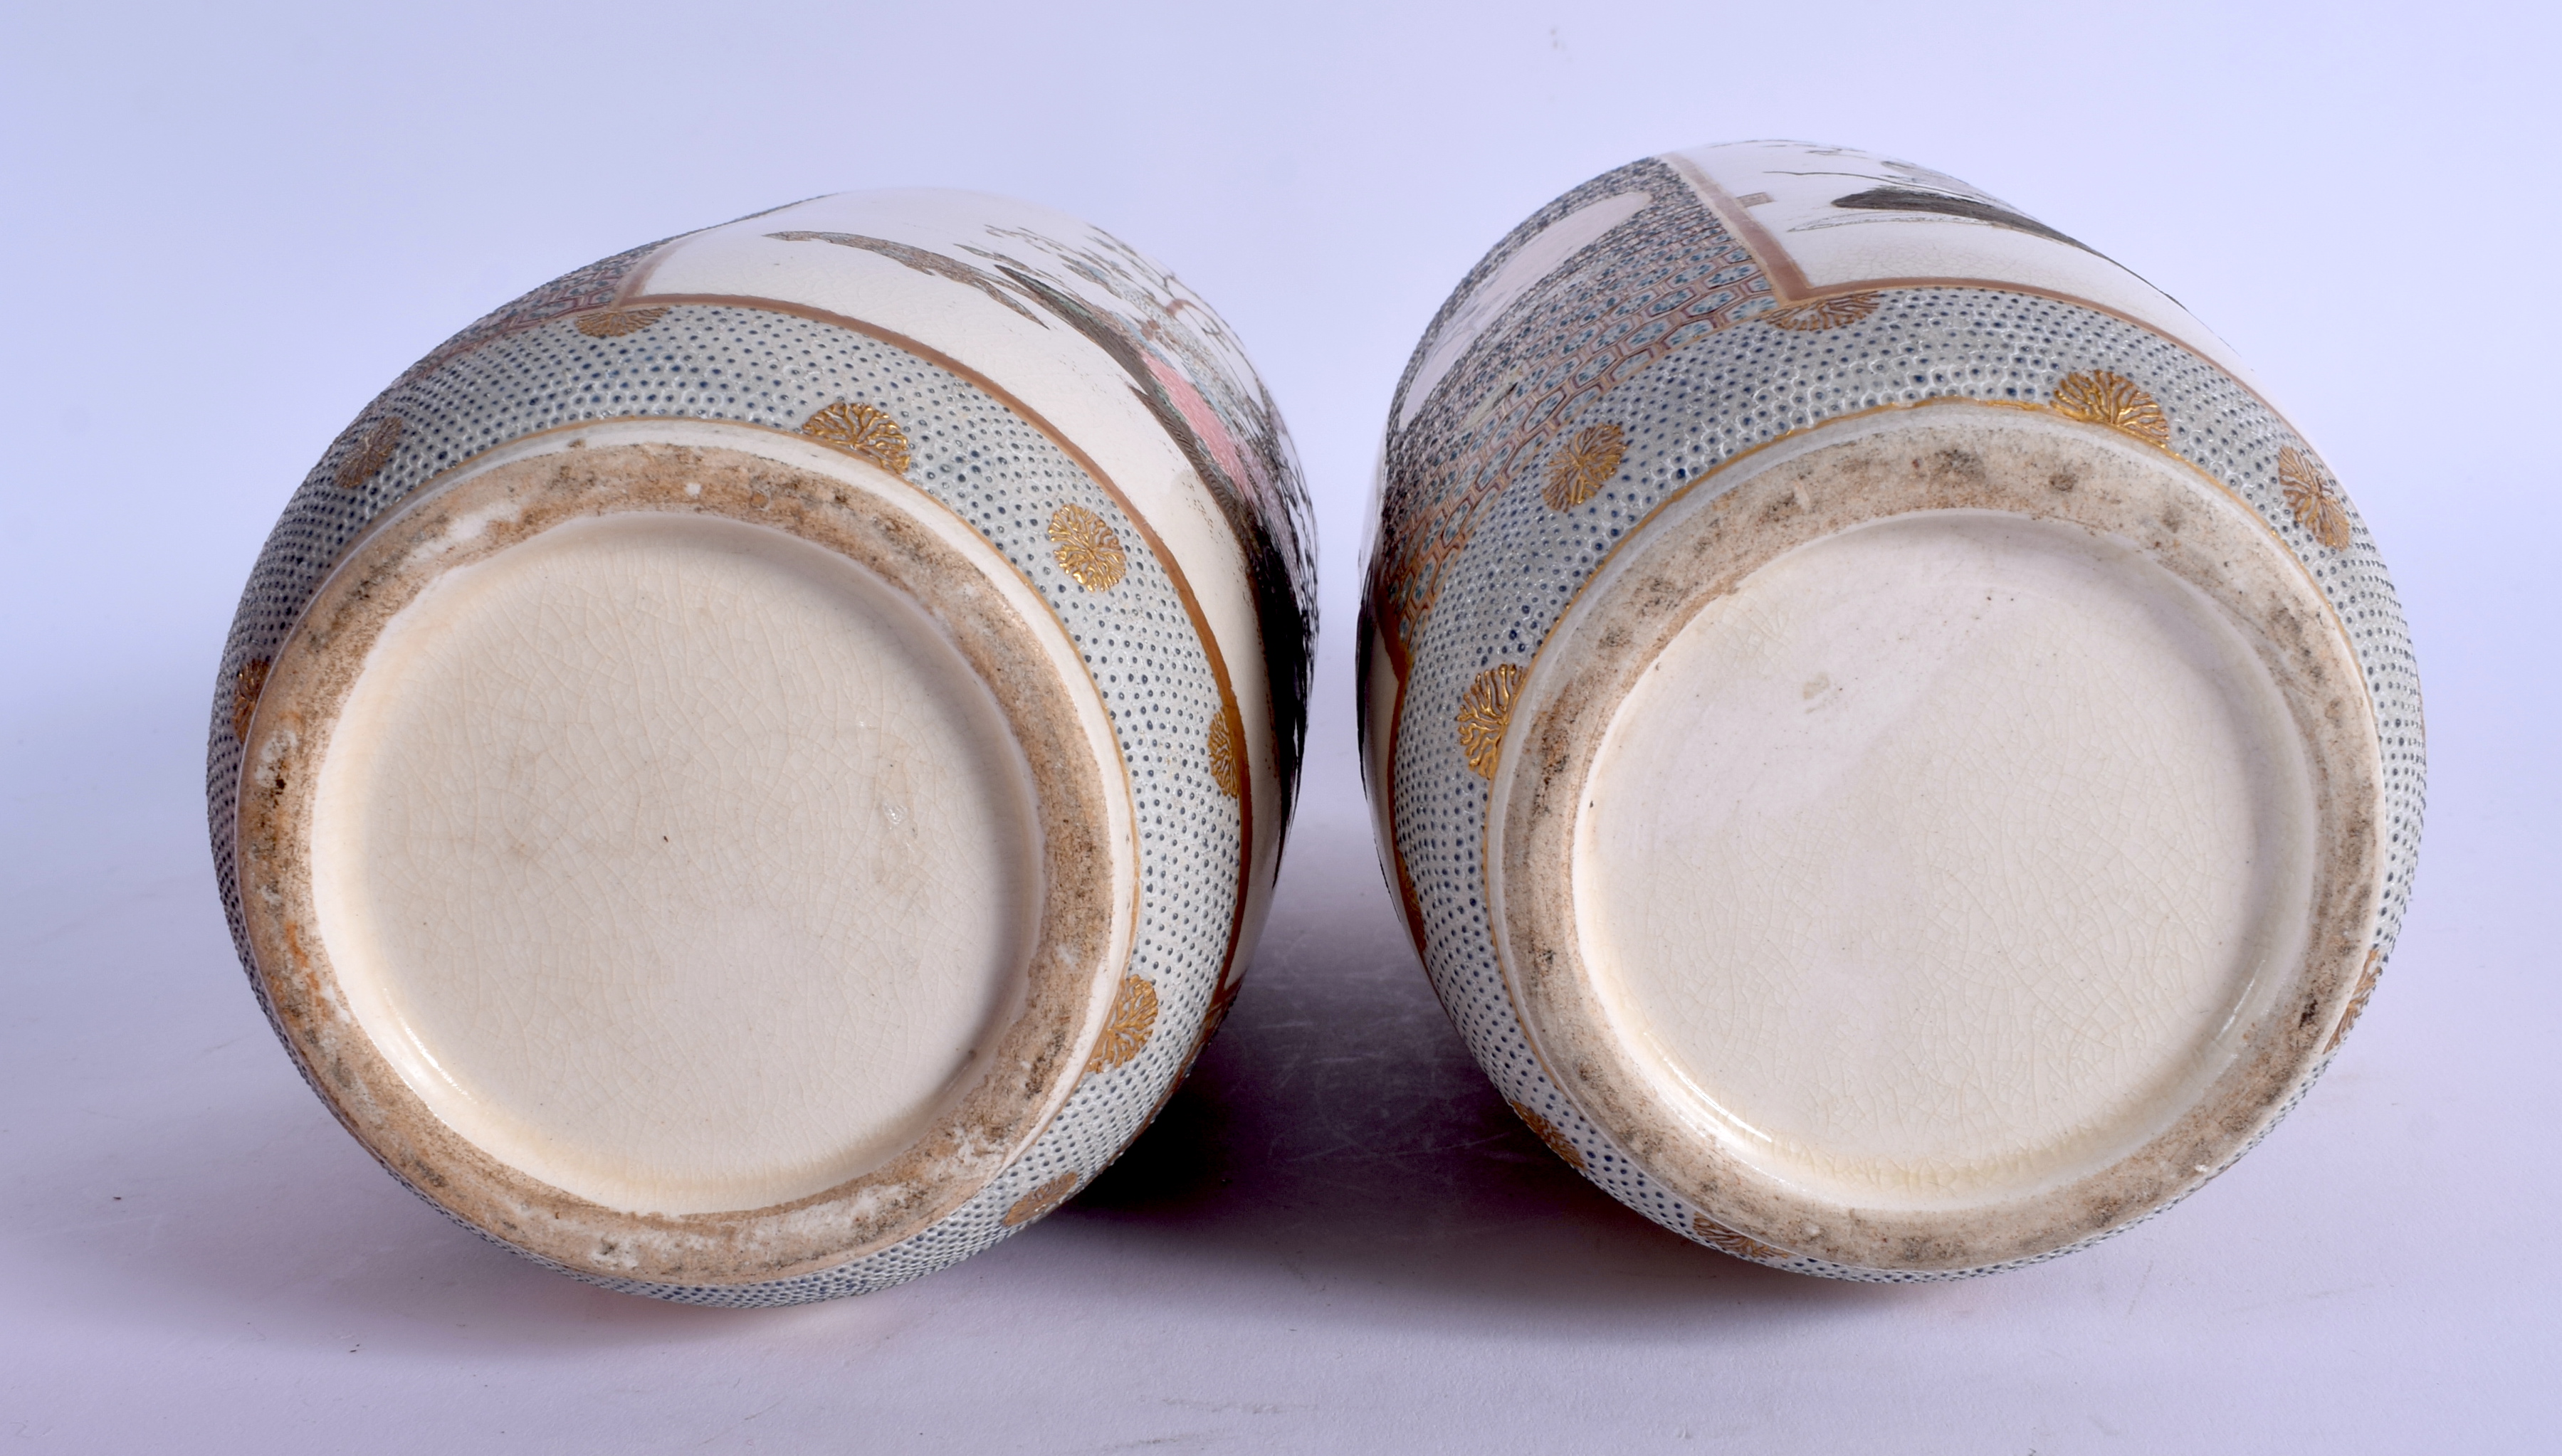 A PAIR OF 19TH CENTURY JAPANESE MEIJI PERIOD SATSUMA VASES painted with bonzai trees and high tables - Image 6 of 19